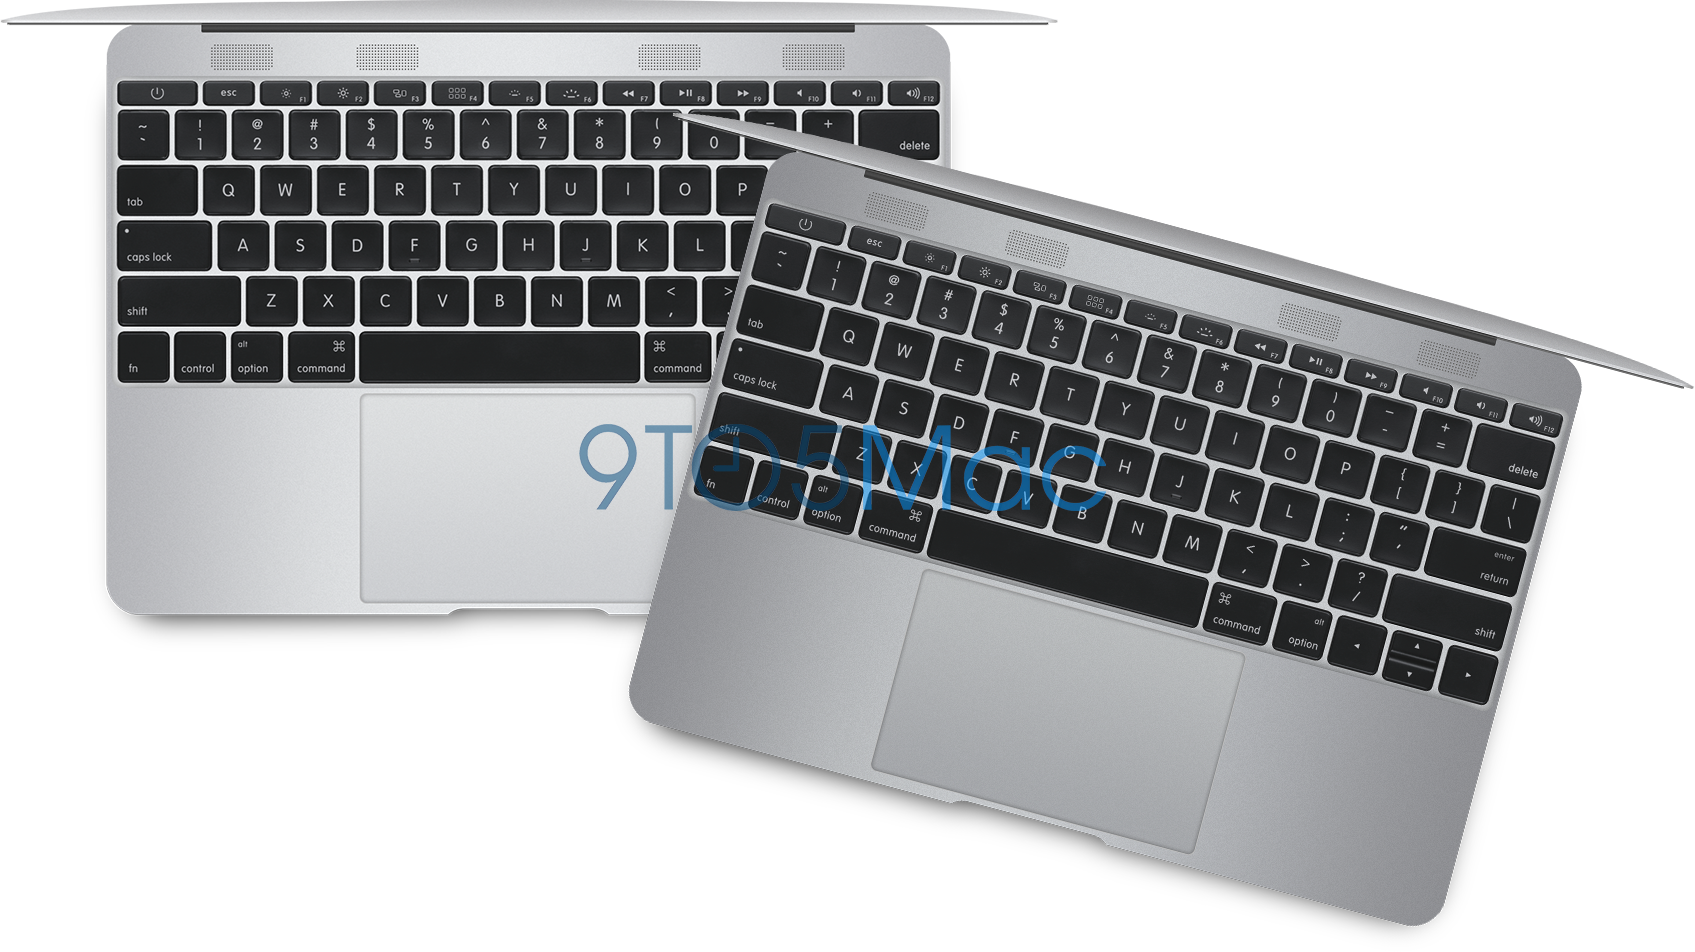 More details emerge about the so-called new 12-inch MacBook